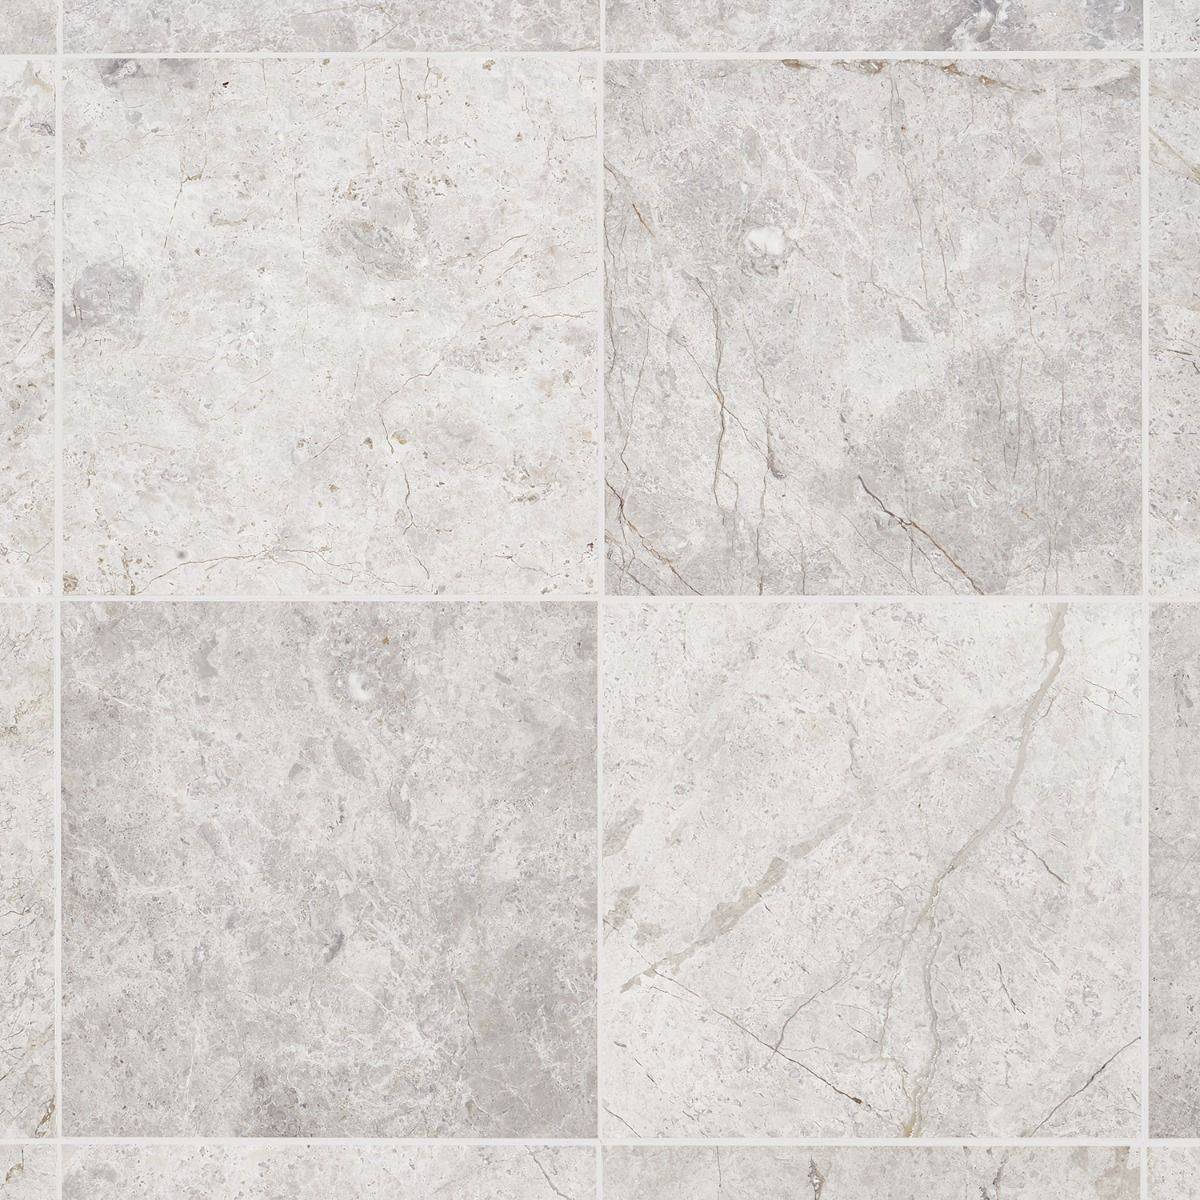 Marble Tiles - Tundra Gray Honed Marble Tile 305x305x10mm - Emperor Marble